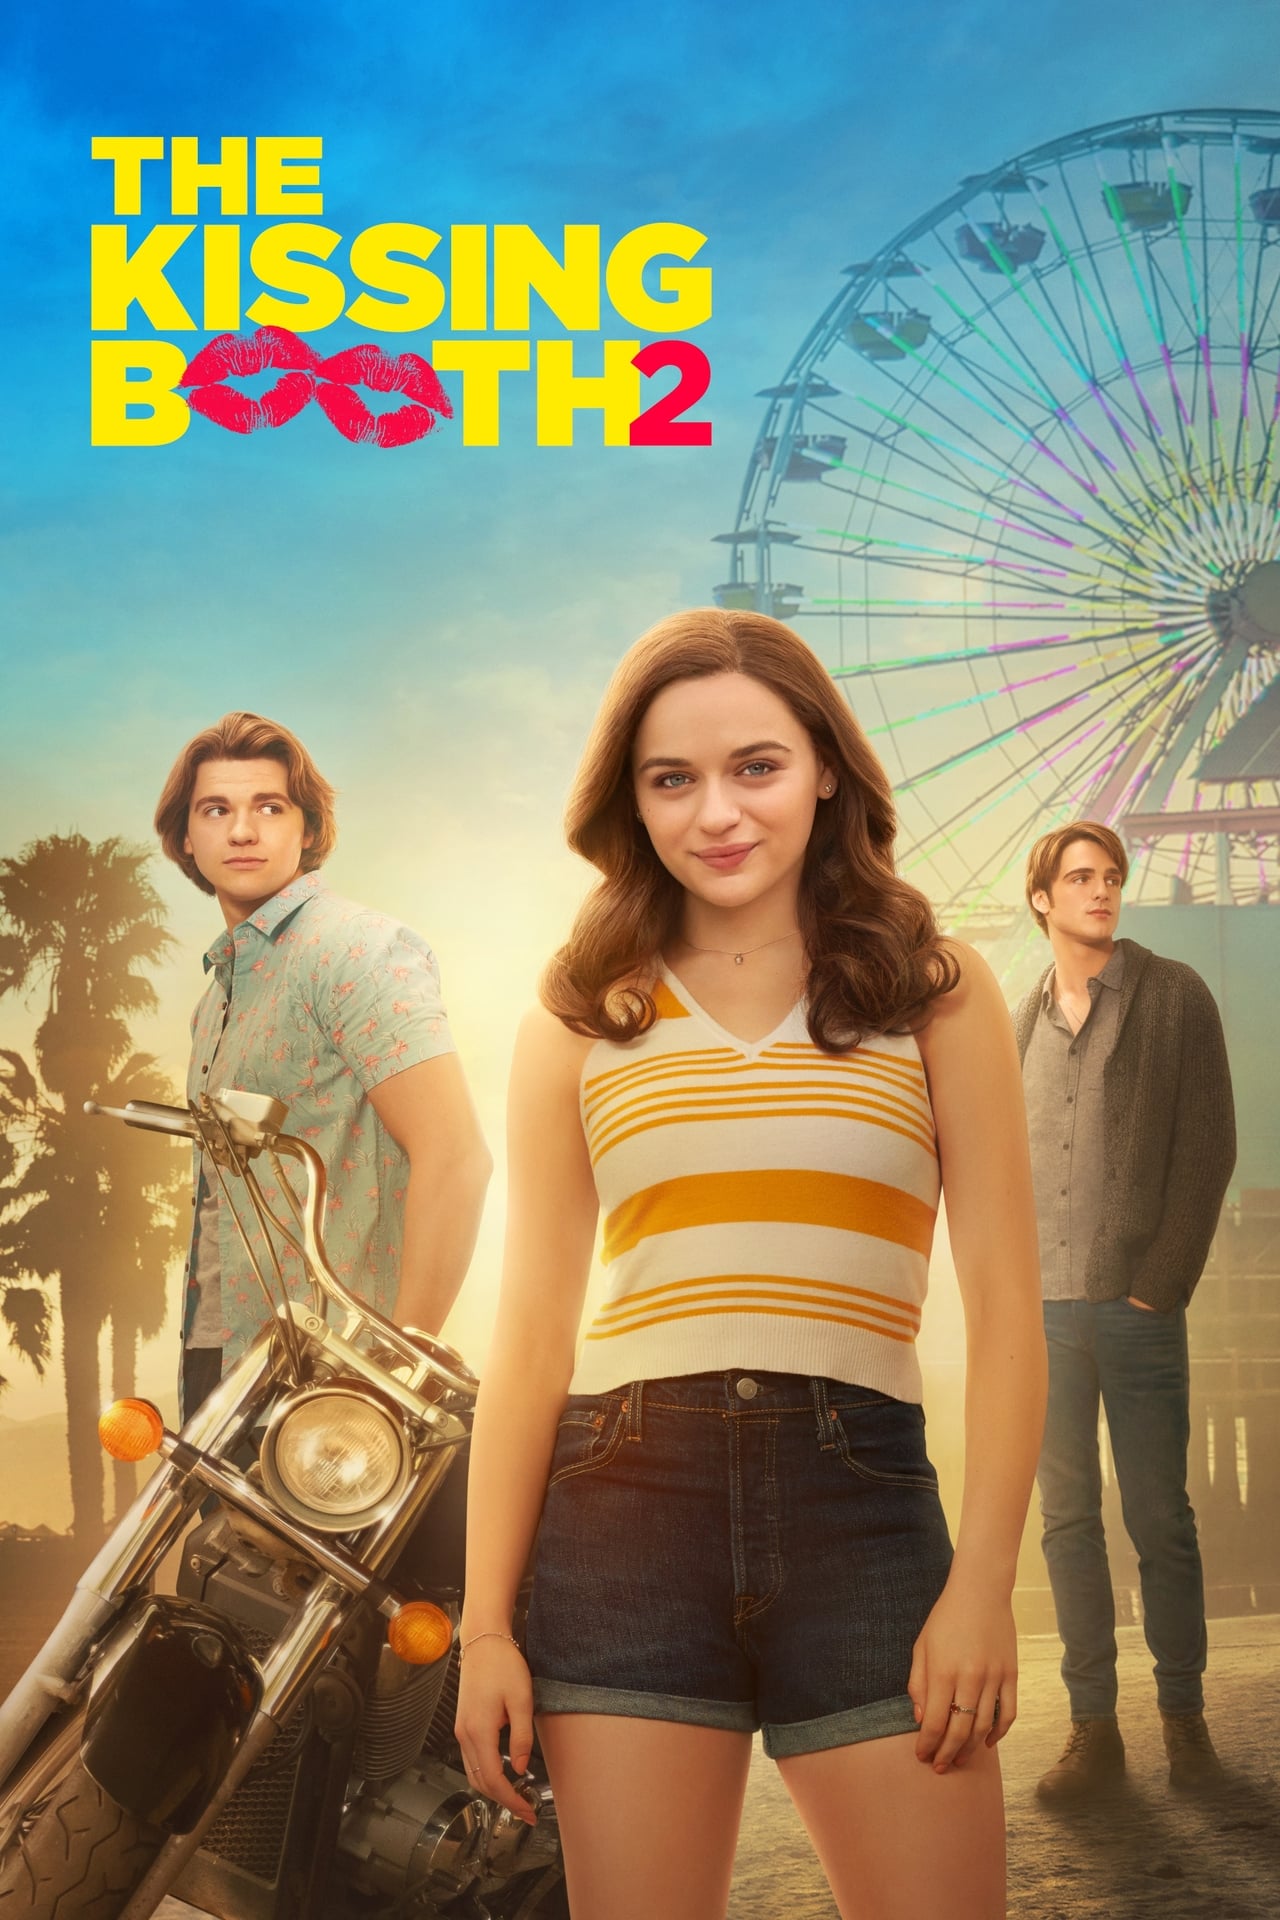 The Kissing Booth 2 (2020) 640Kbps 24Fps 48Khz 5.1Ch DD+ NF E-AC3 Turkish Audio TAC